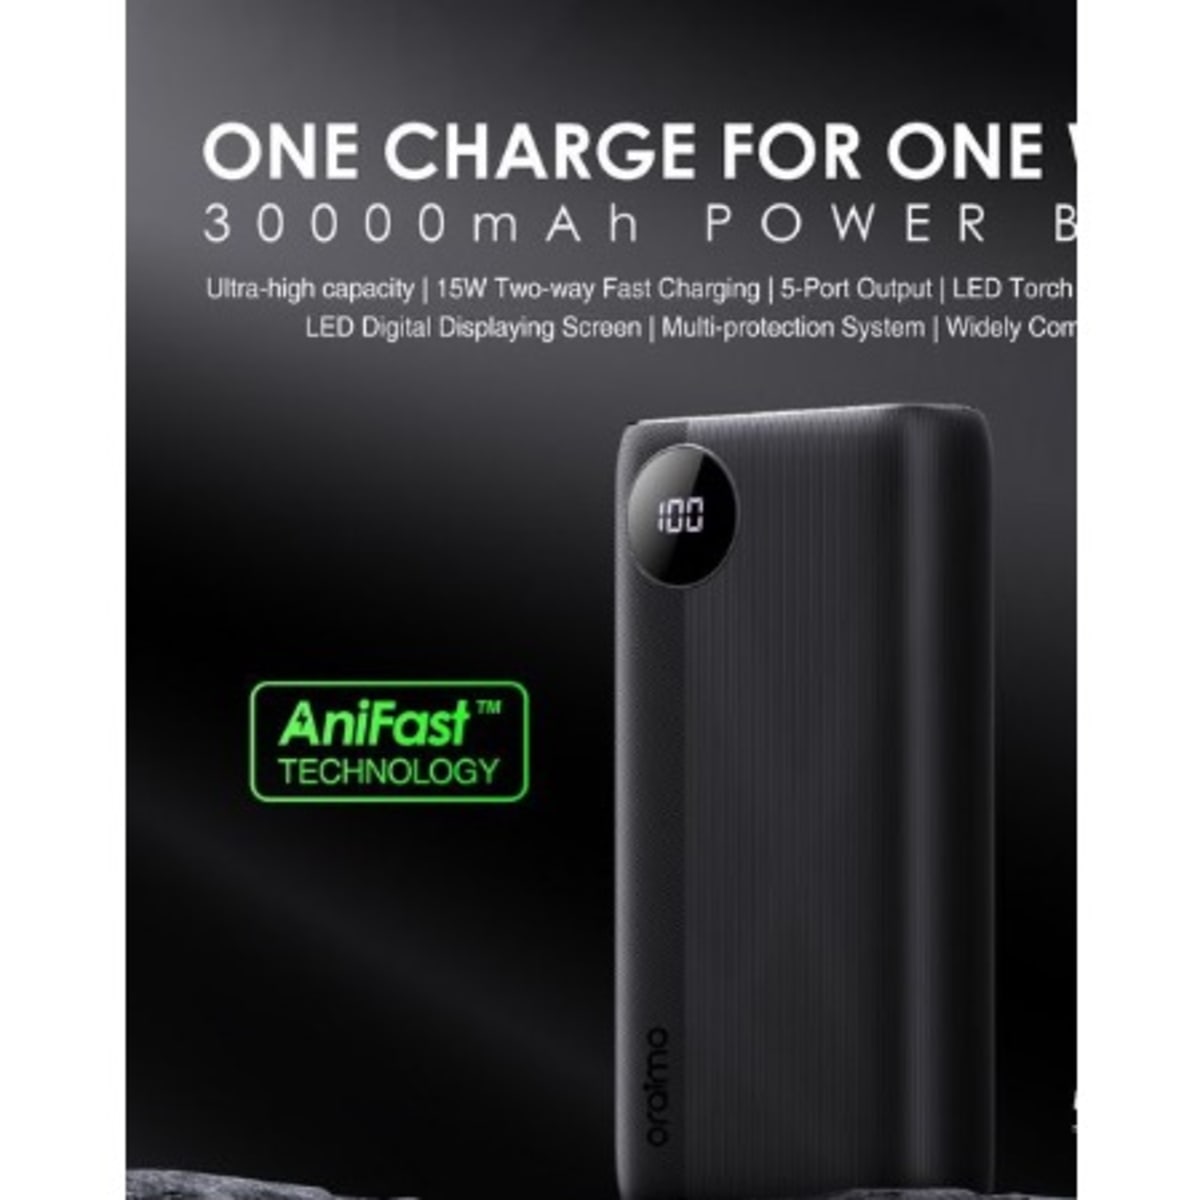 Oraimo 30000mah Superior Quality Ultra Fast Charging Power Bank